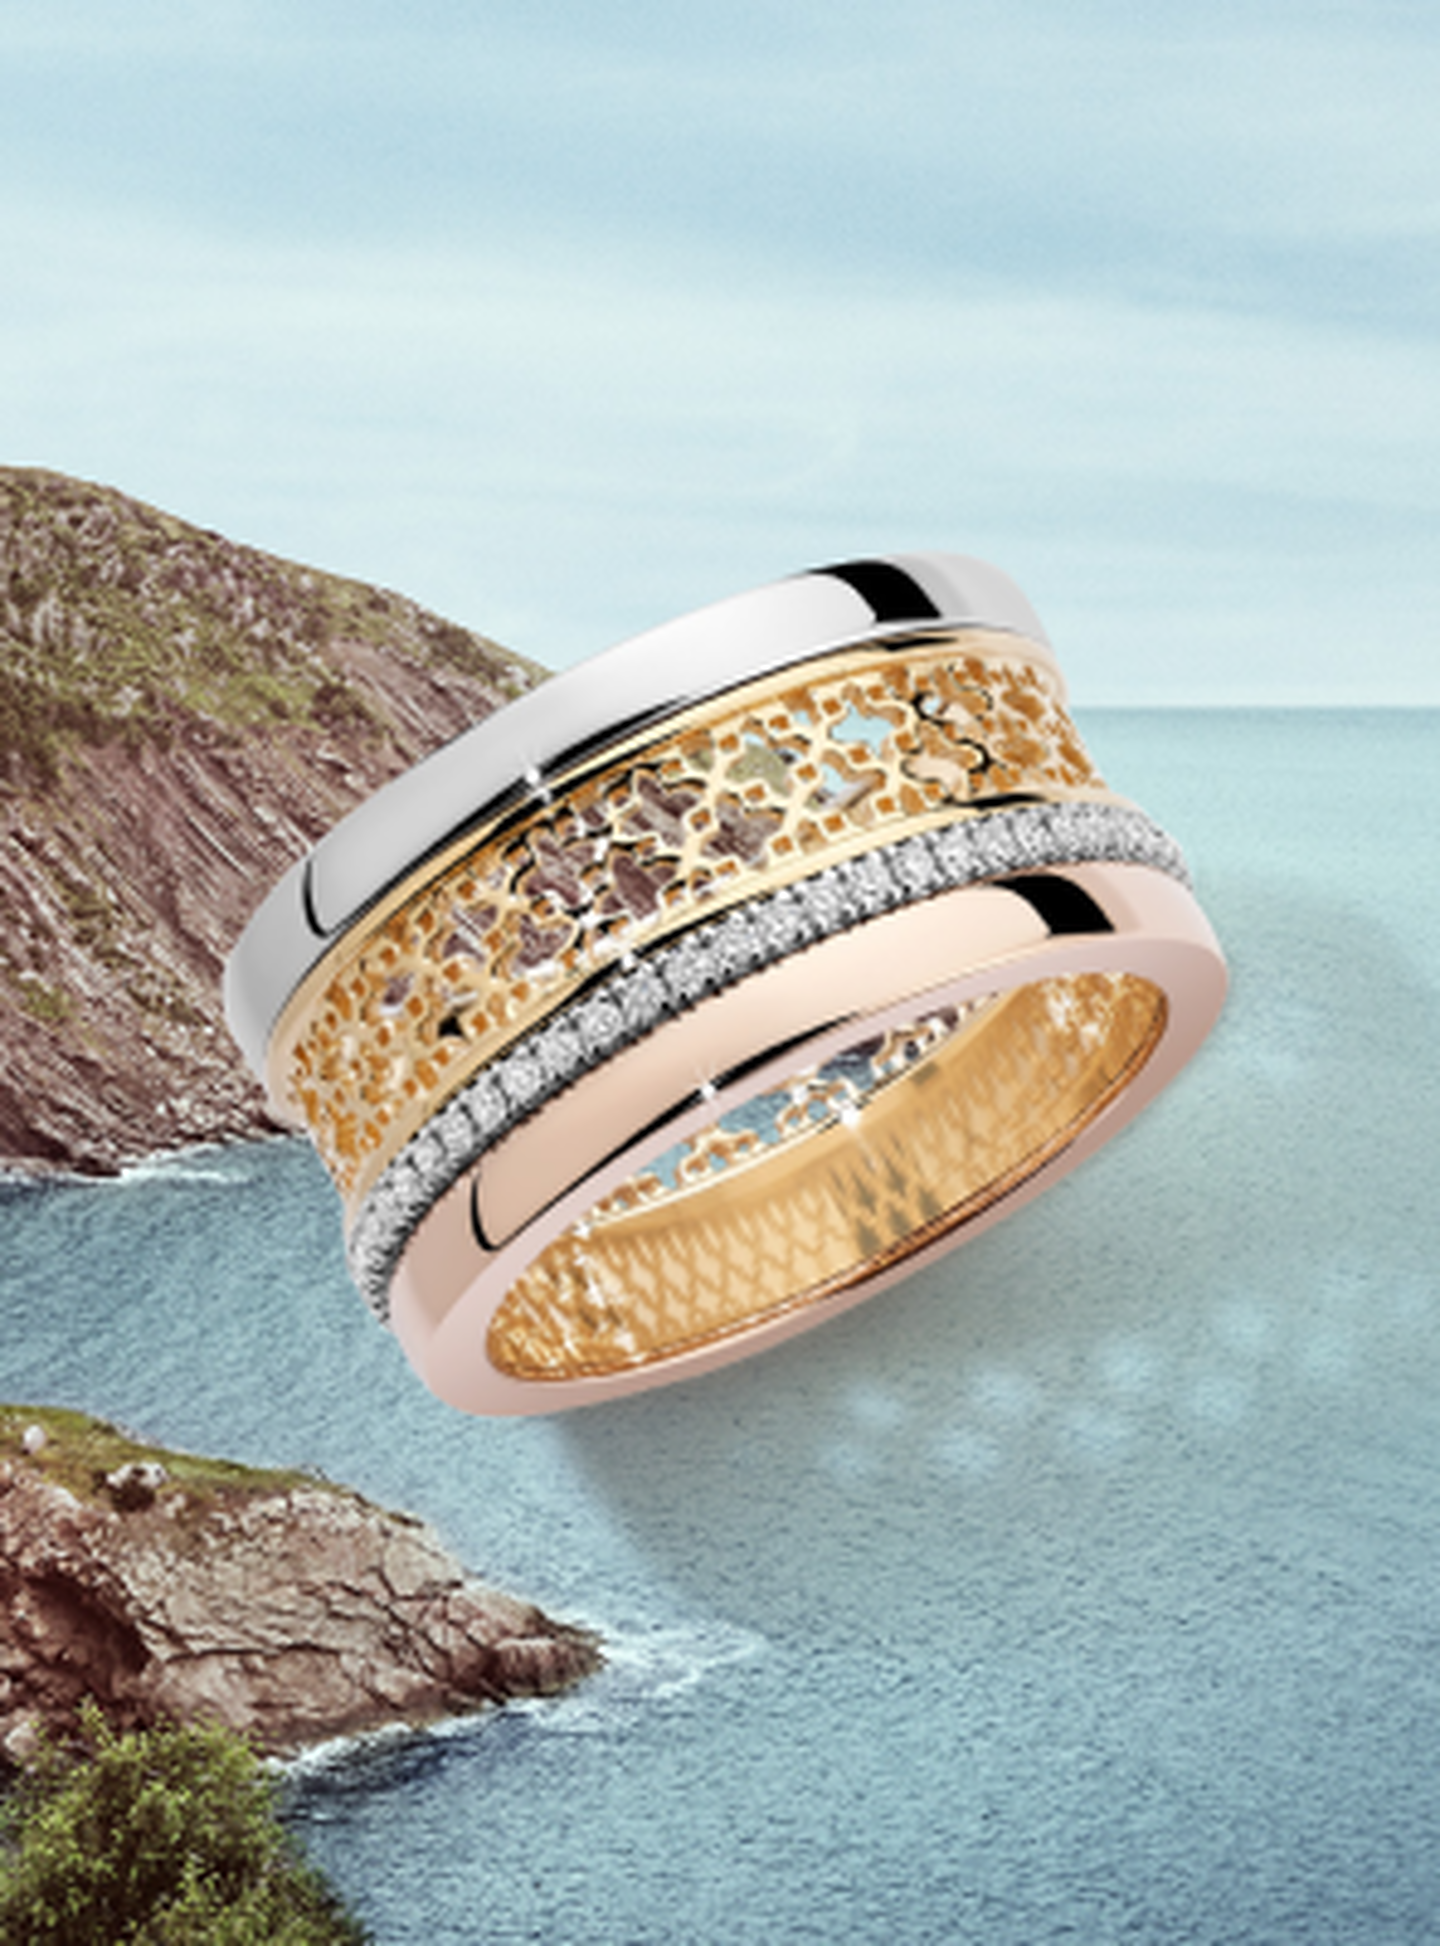 A Birks Dare to Dream Ring on beach background.